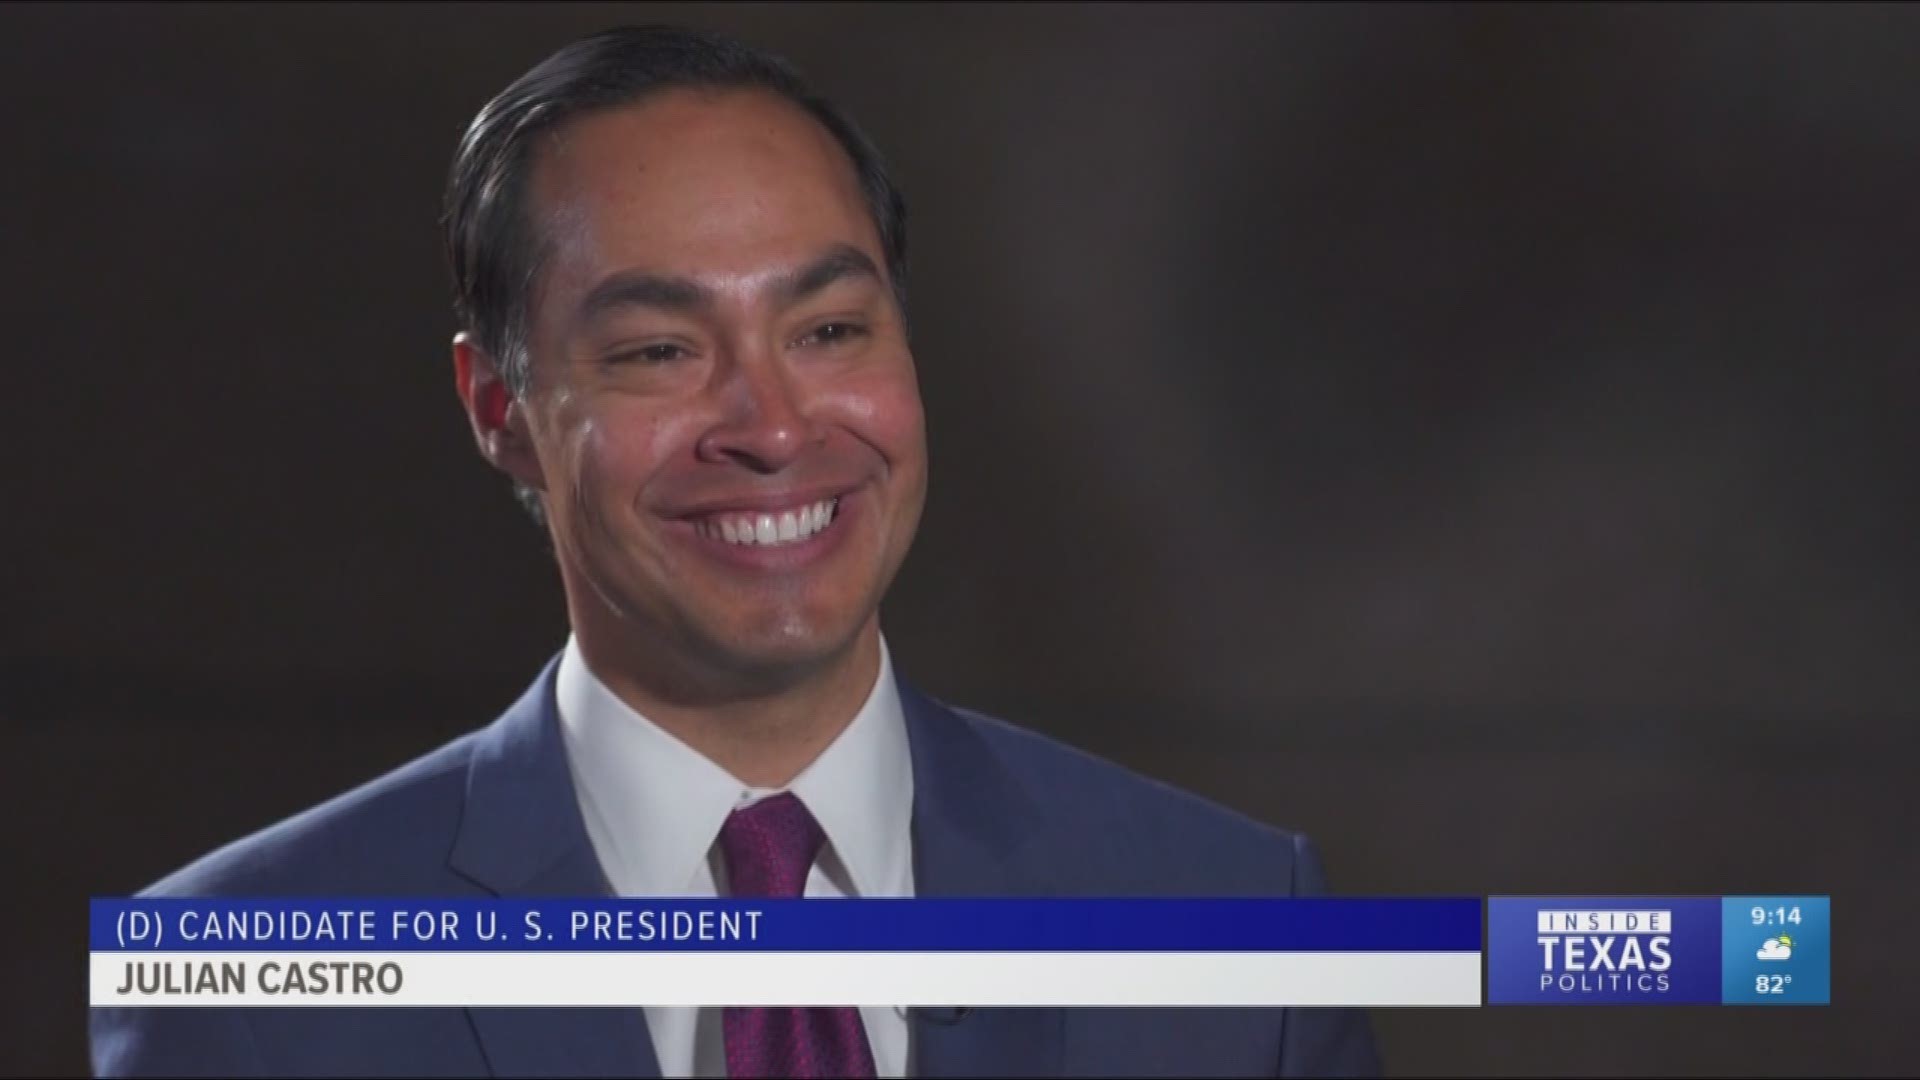 Former HUD Secretary Julian Castro needed a breakout moment in his campaign for president, and he got one during the second night of the first Democratic 2020 presidential primary debate.